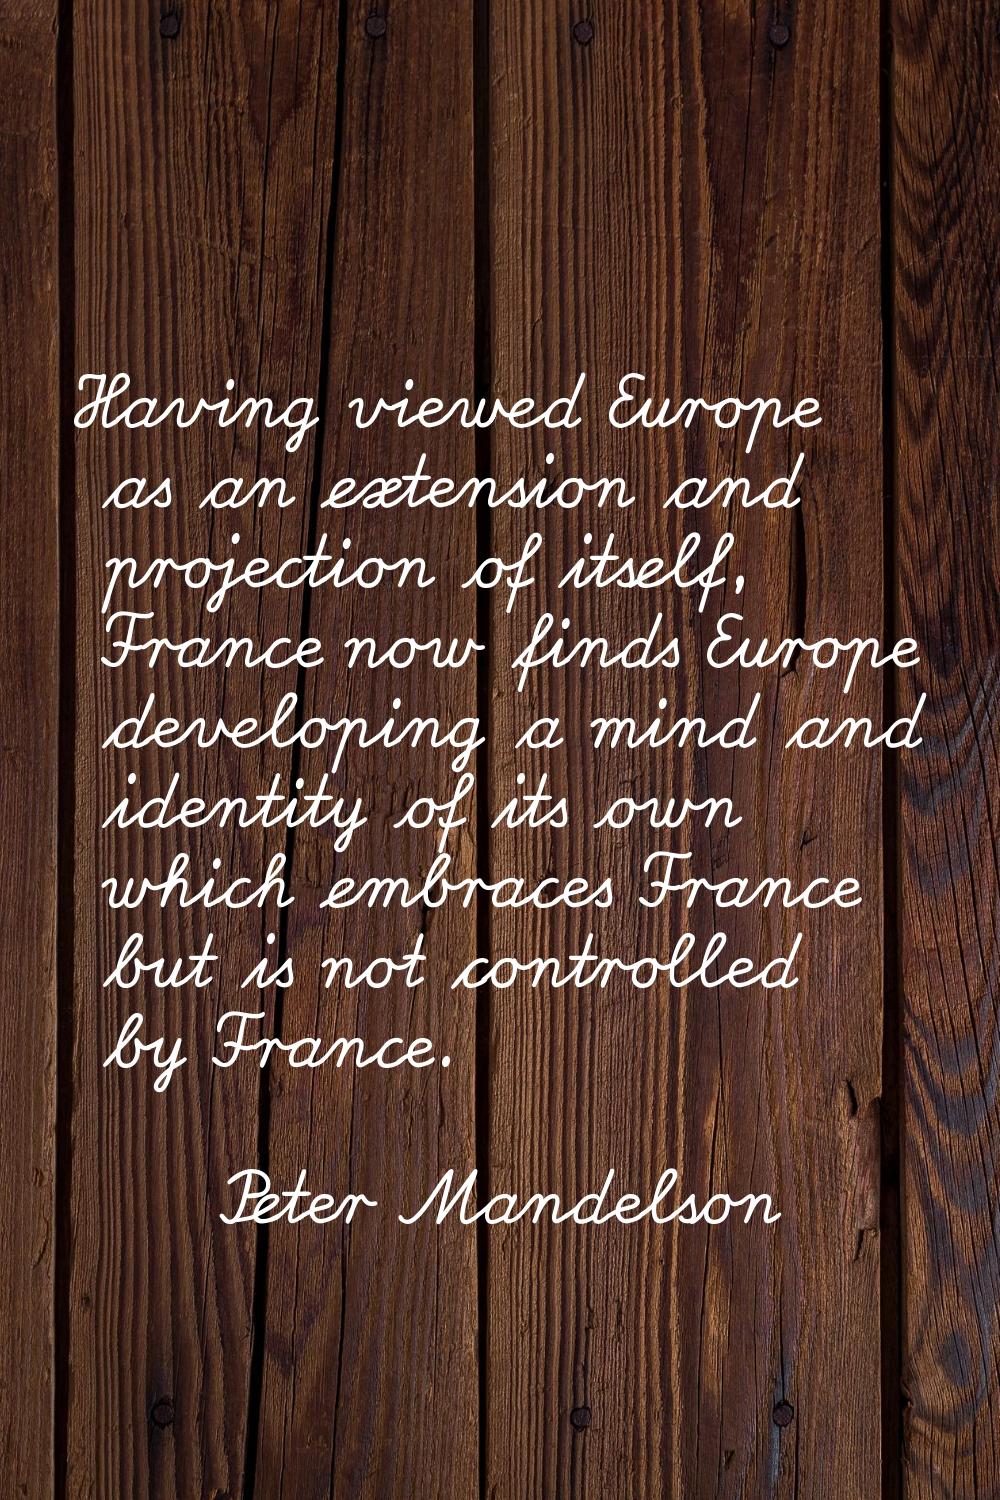 Having viewed Europe as an extension and projection of itself, France now finds Europe developing a